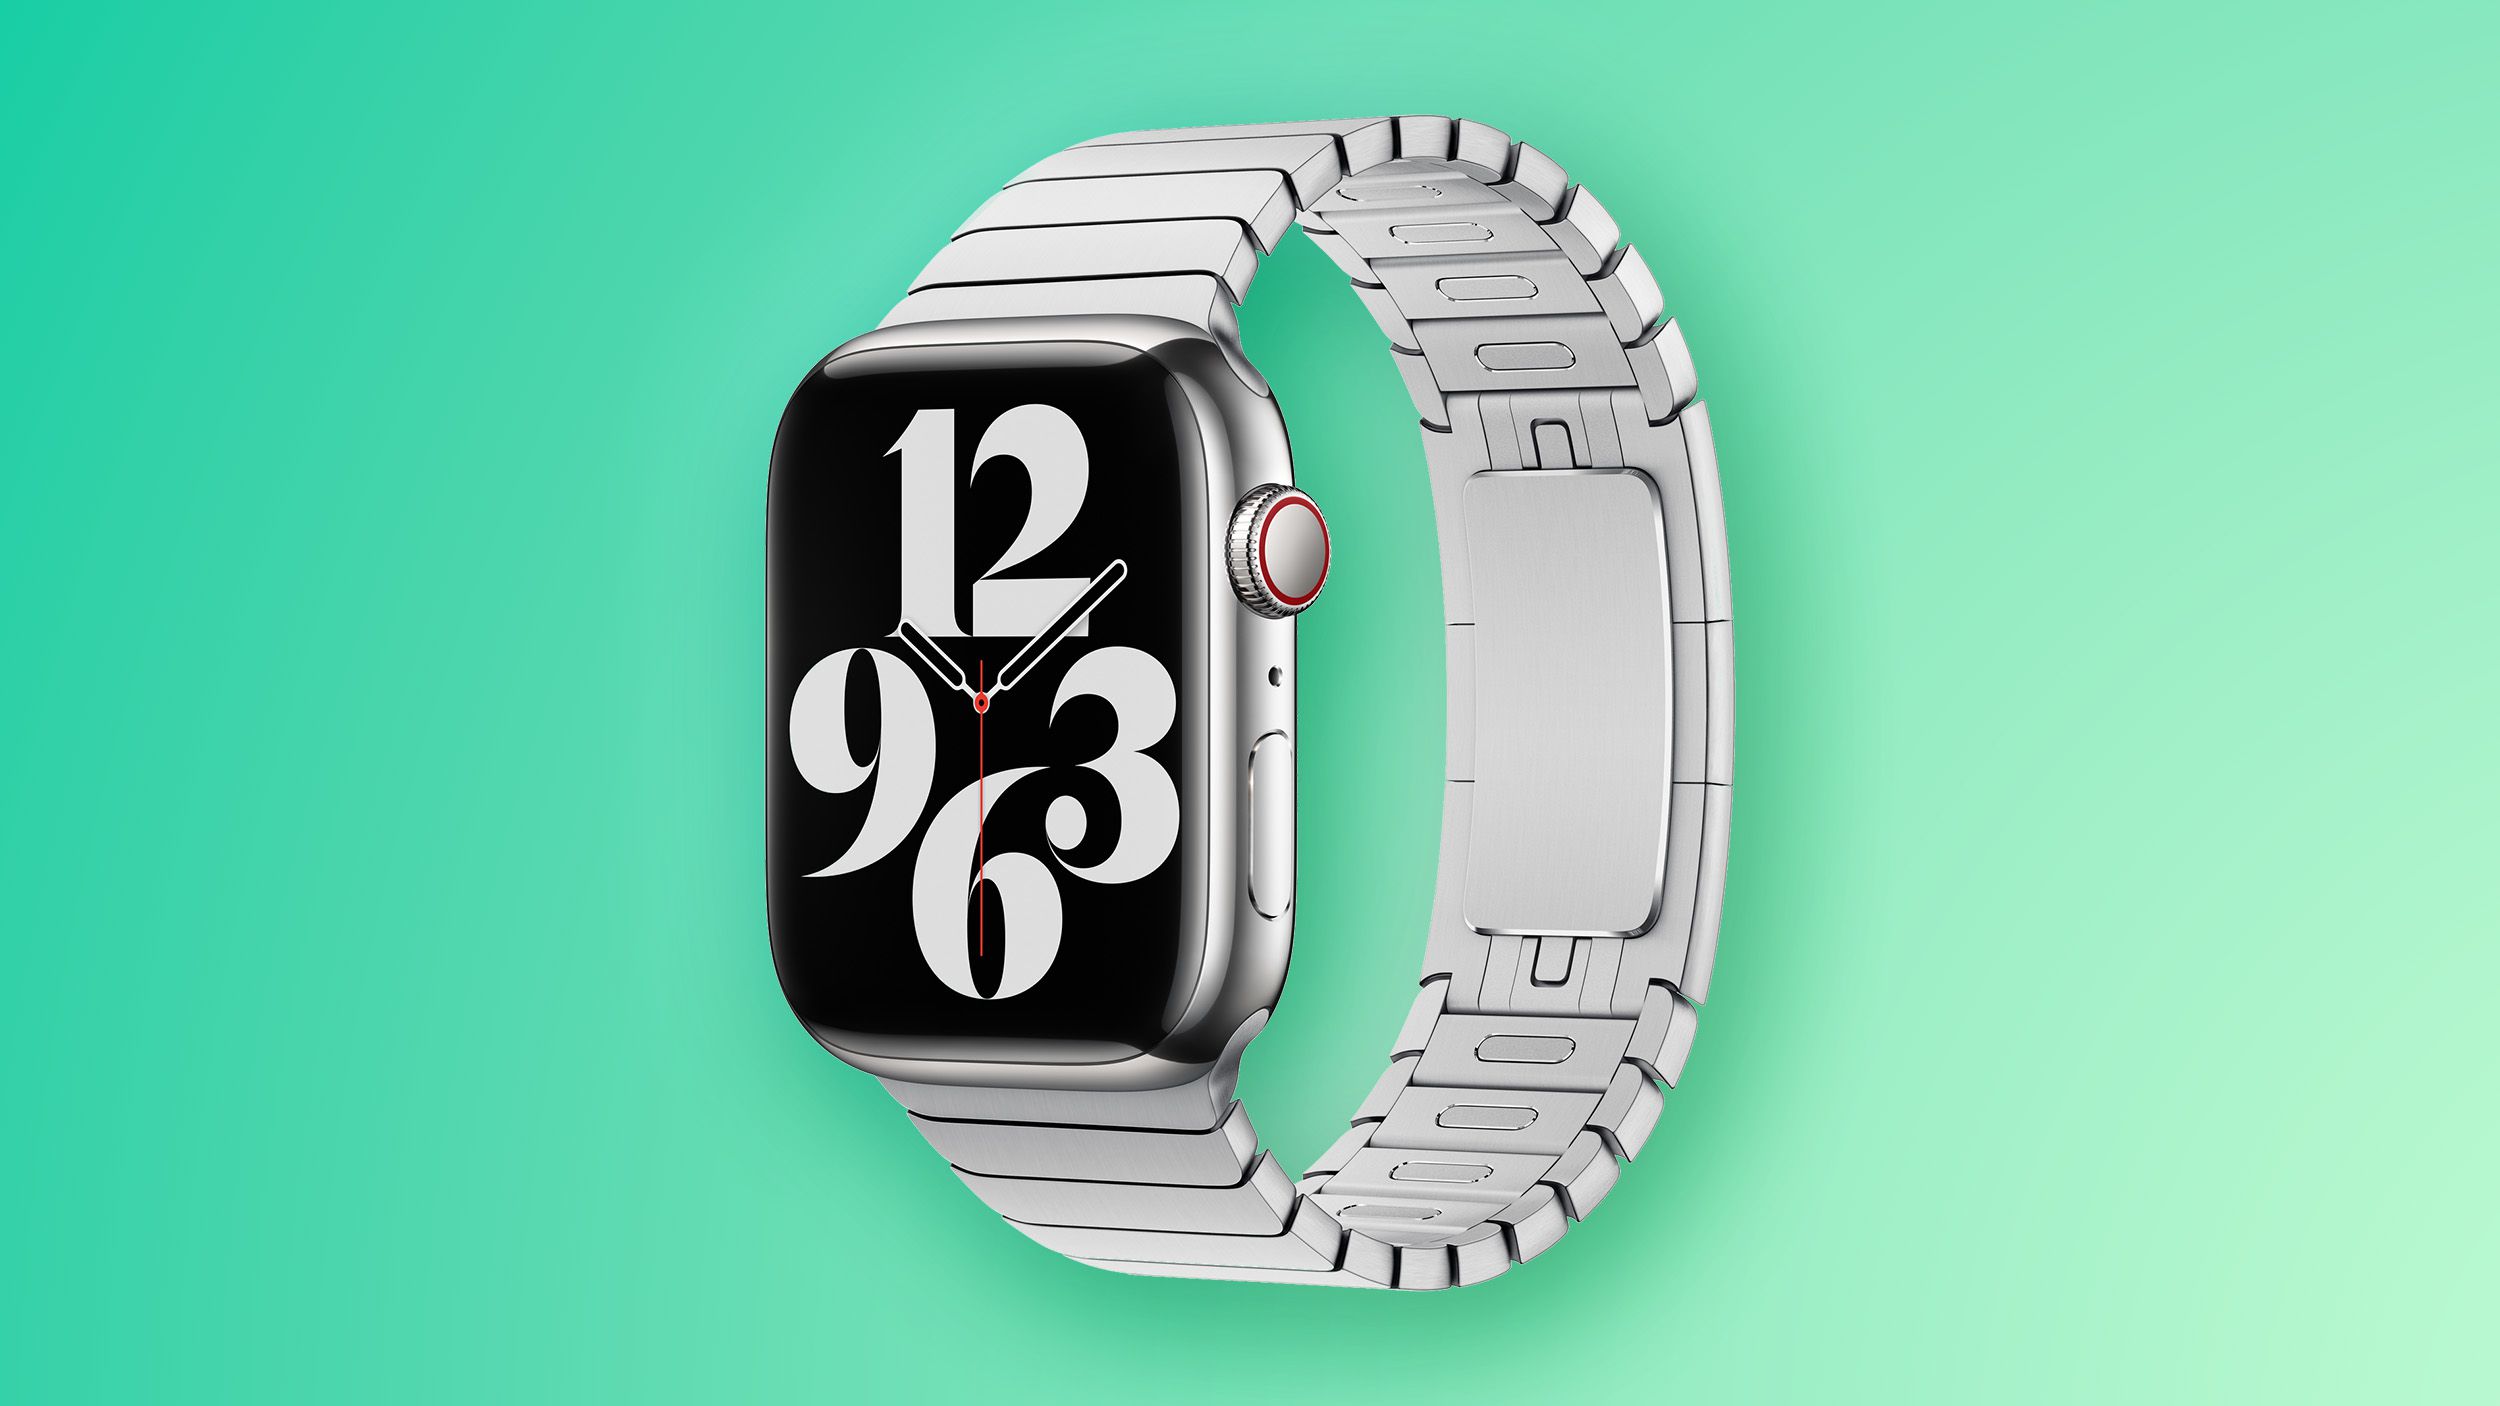 Exclusive Employee Discount: Apple Slashes Prices on Link Bracelet and Milanese Loop